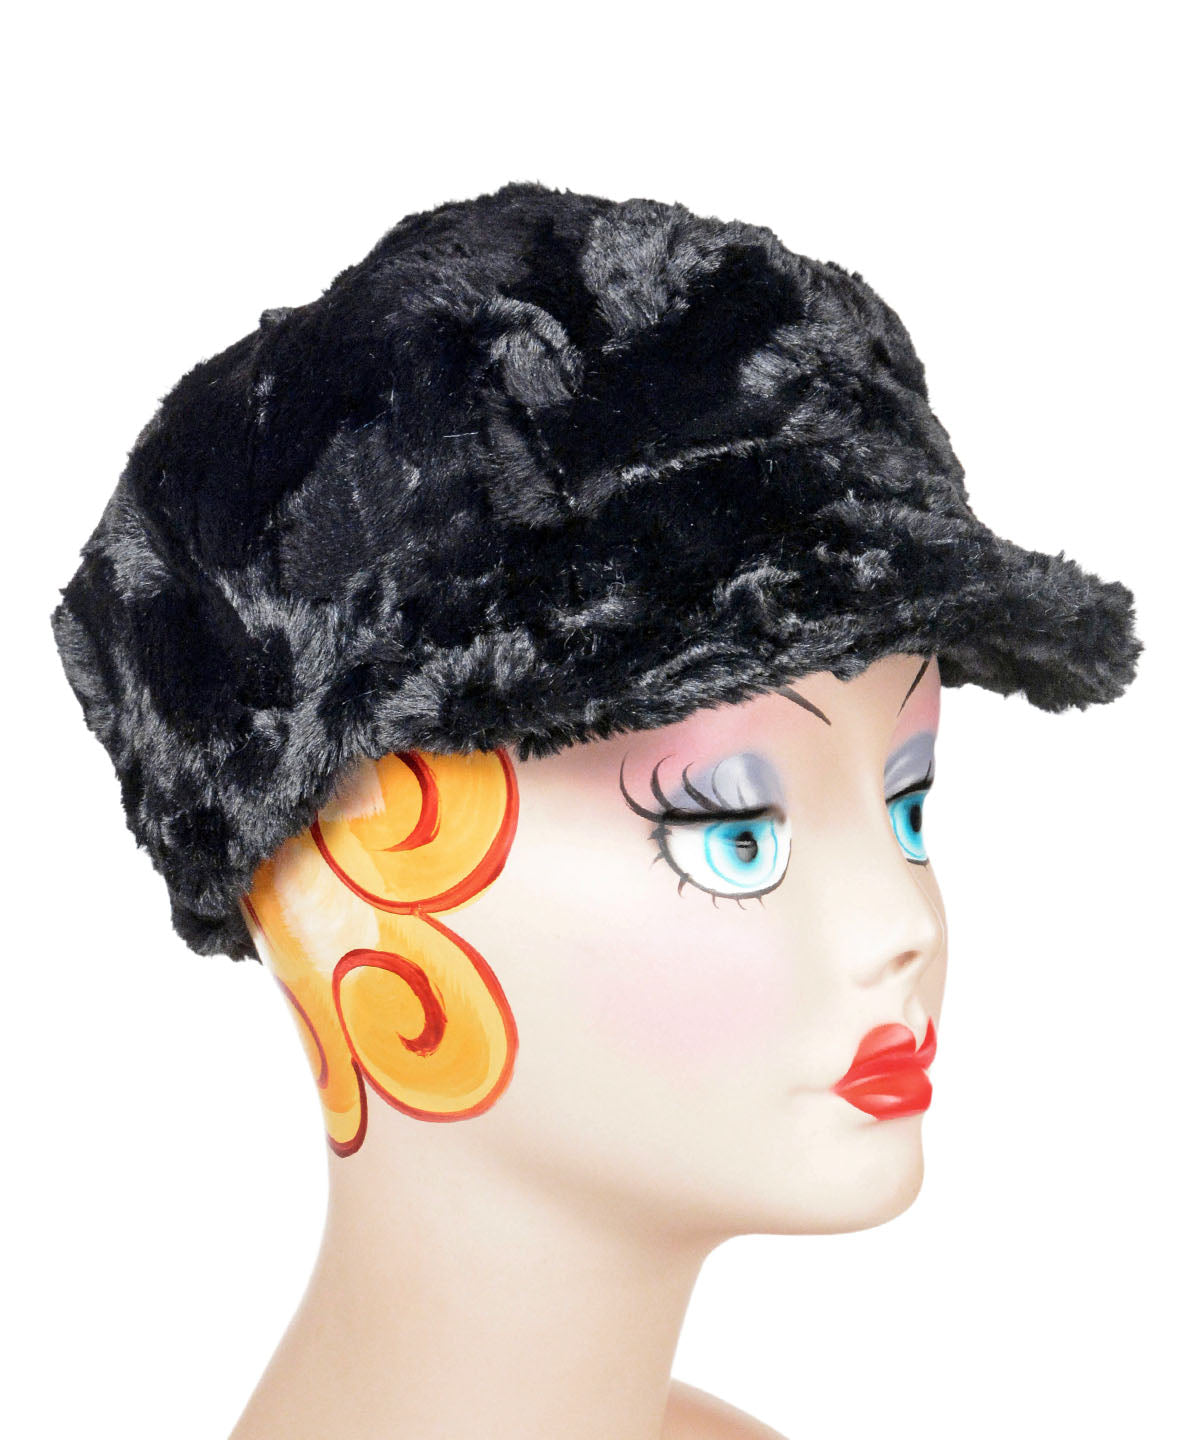 Valerie Hat Cuddly Faux Fur in Black by Pandemonium Millinery. Handmade in Seattle WA USA.